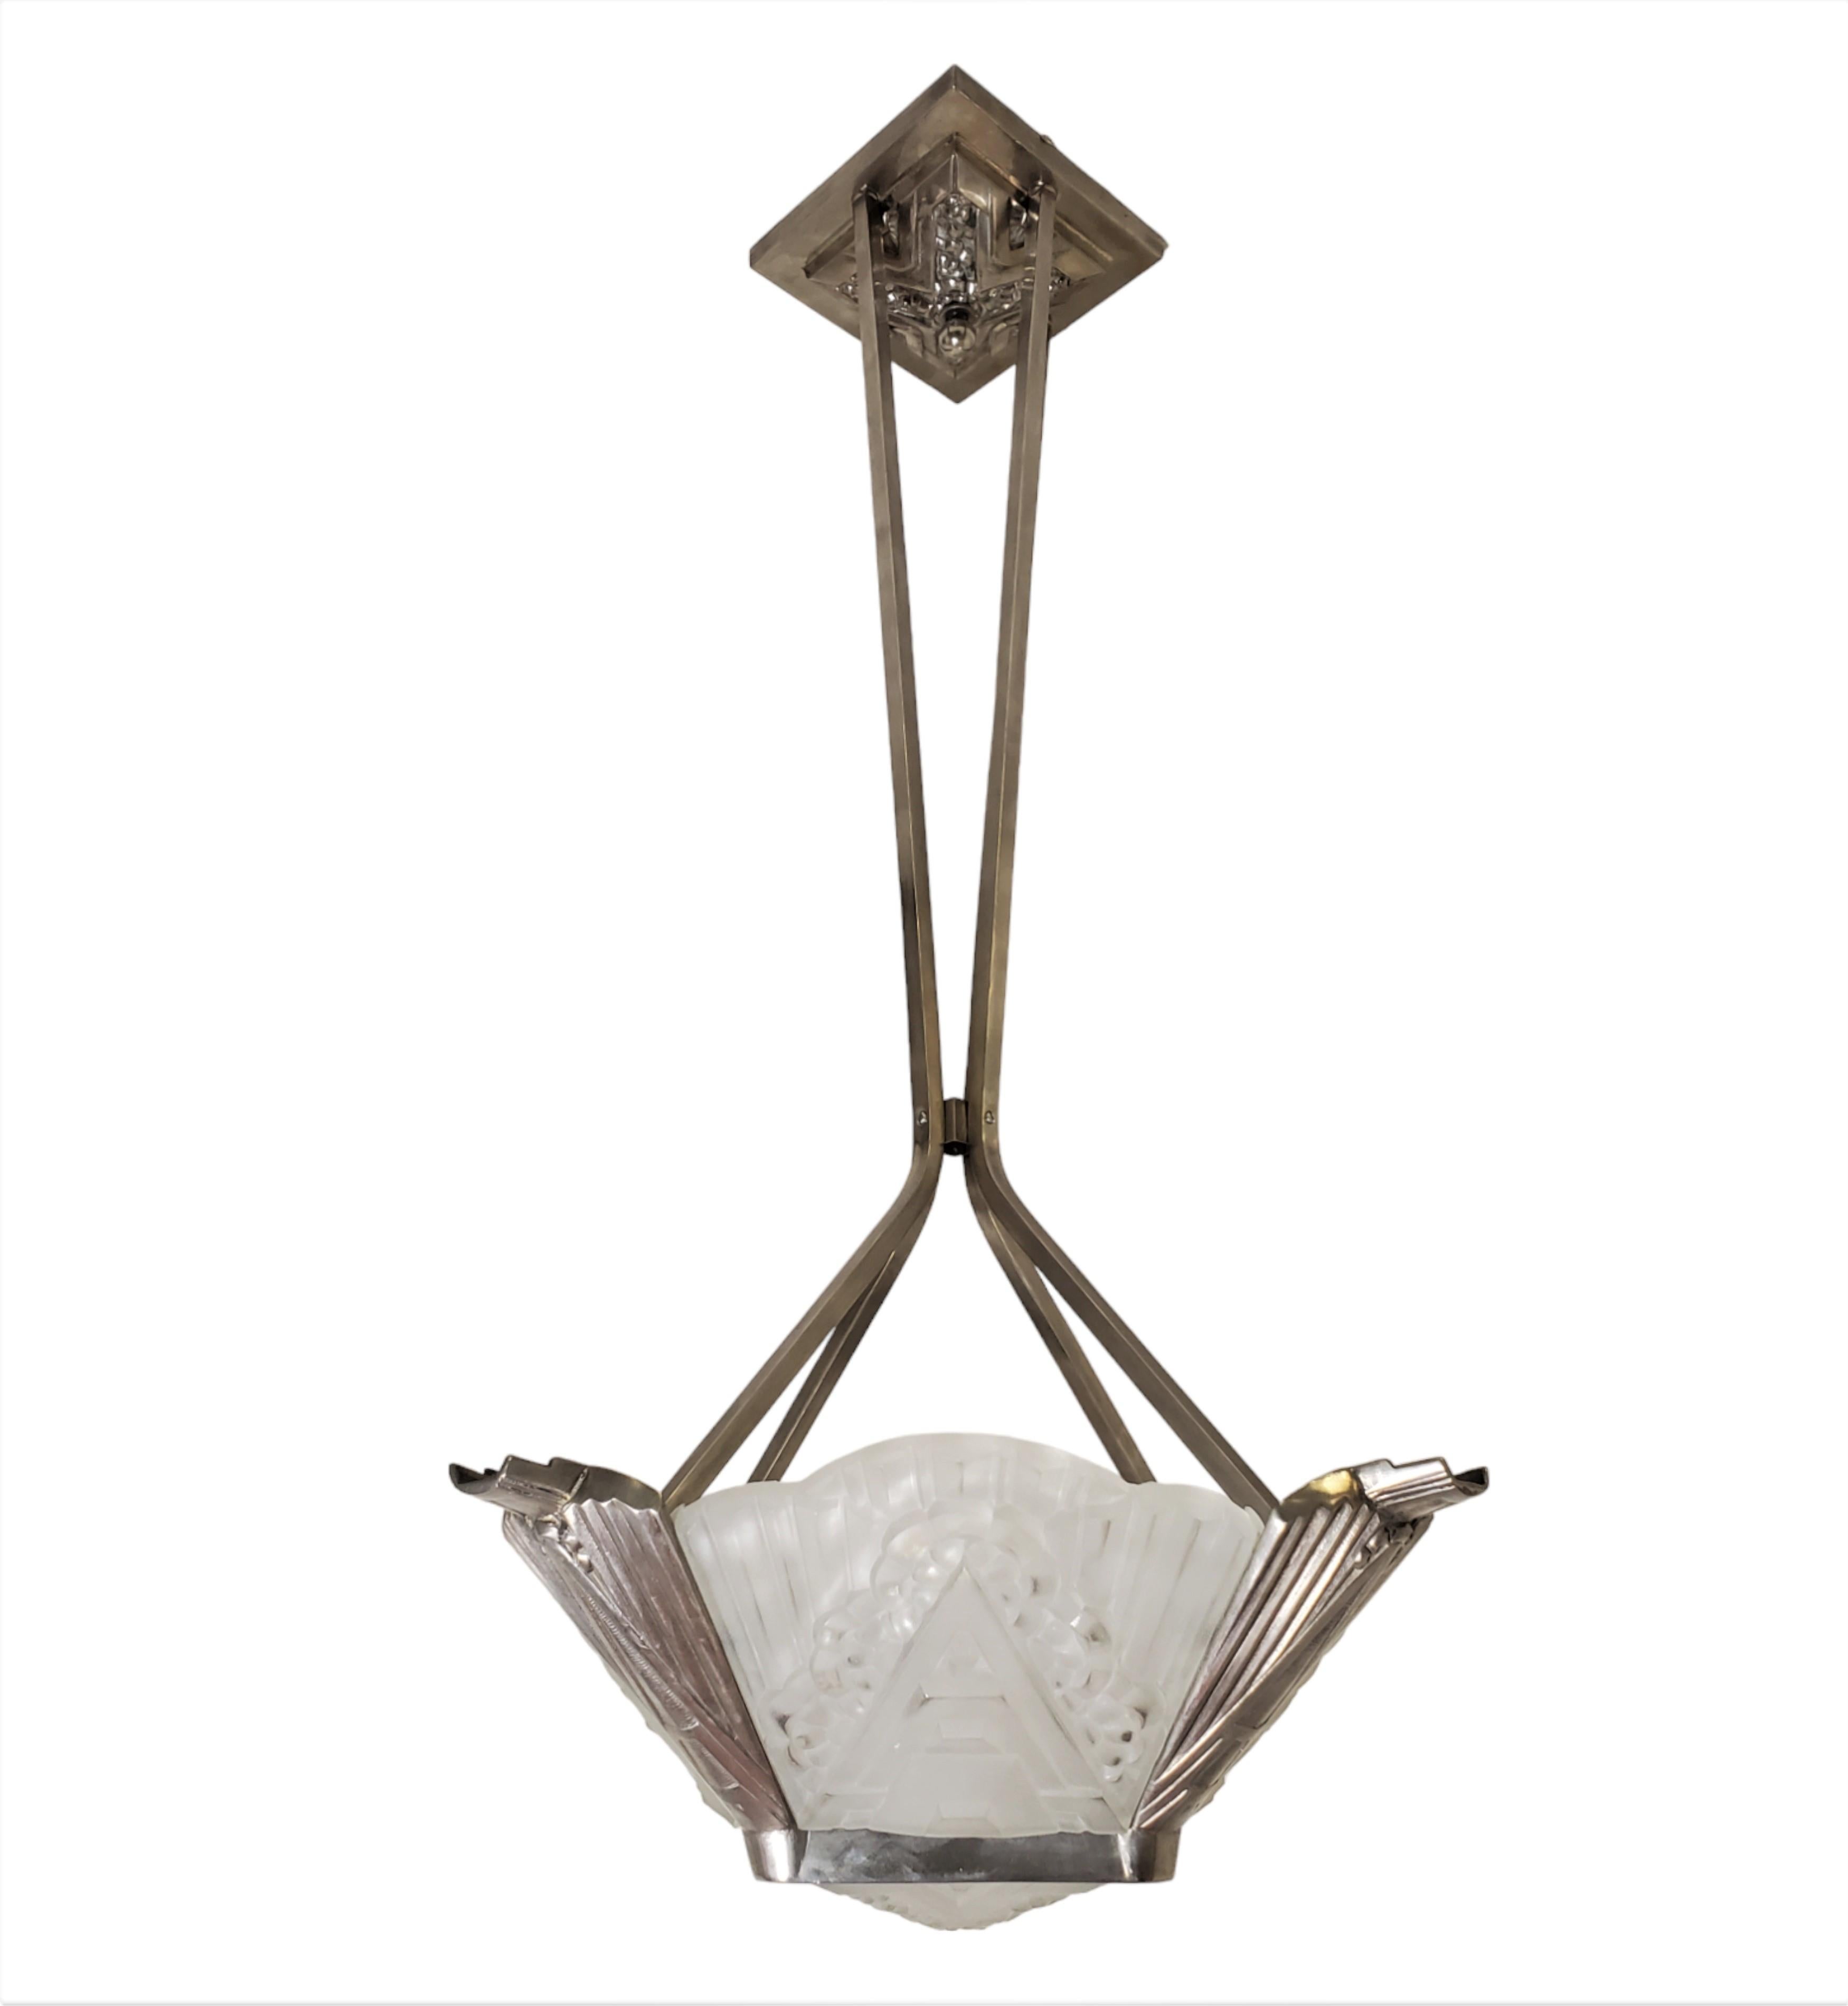 An original French Art Deco molded art glass chandelier comprising four panels plus a square center. The panels are created using a frosted process with polished areas producing glossy highlights giving the glass extra depth and presence.
 Each